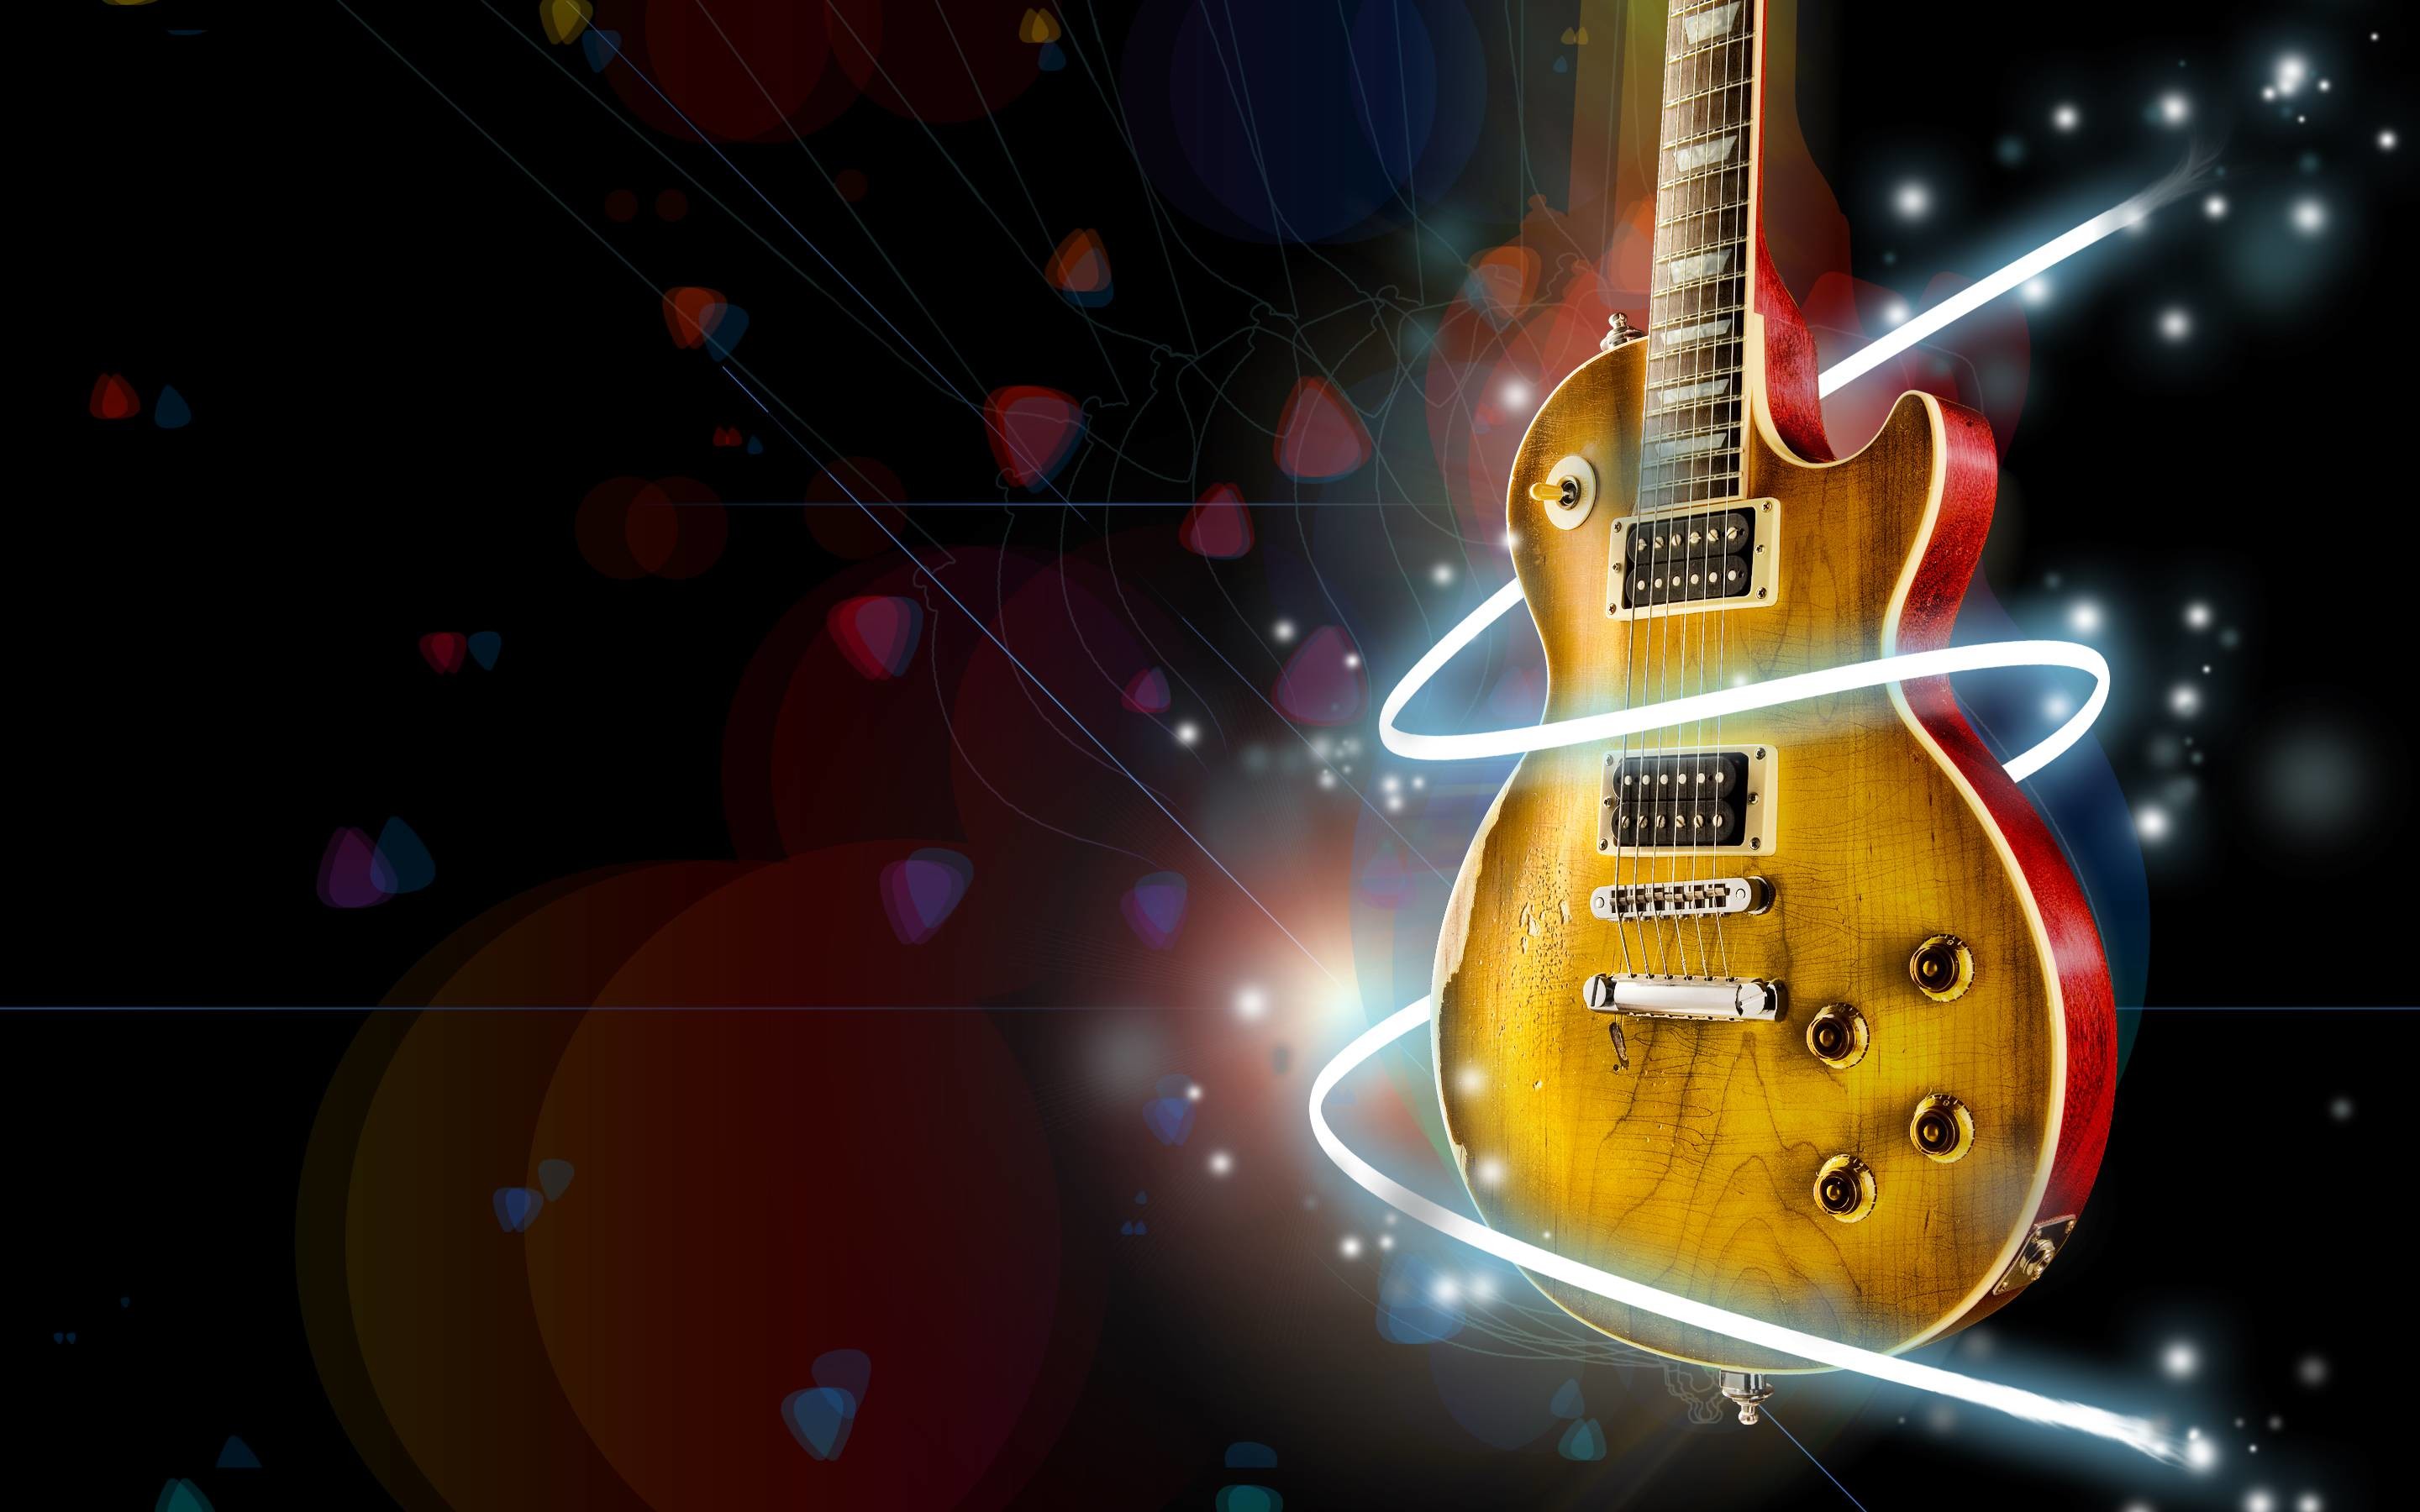 2880x1800 hd guitar wallpapers high resolution pictures hd desktop wallpapers amazing  images cool smart phone background photos download high quality artworks  dual ...